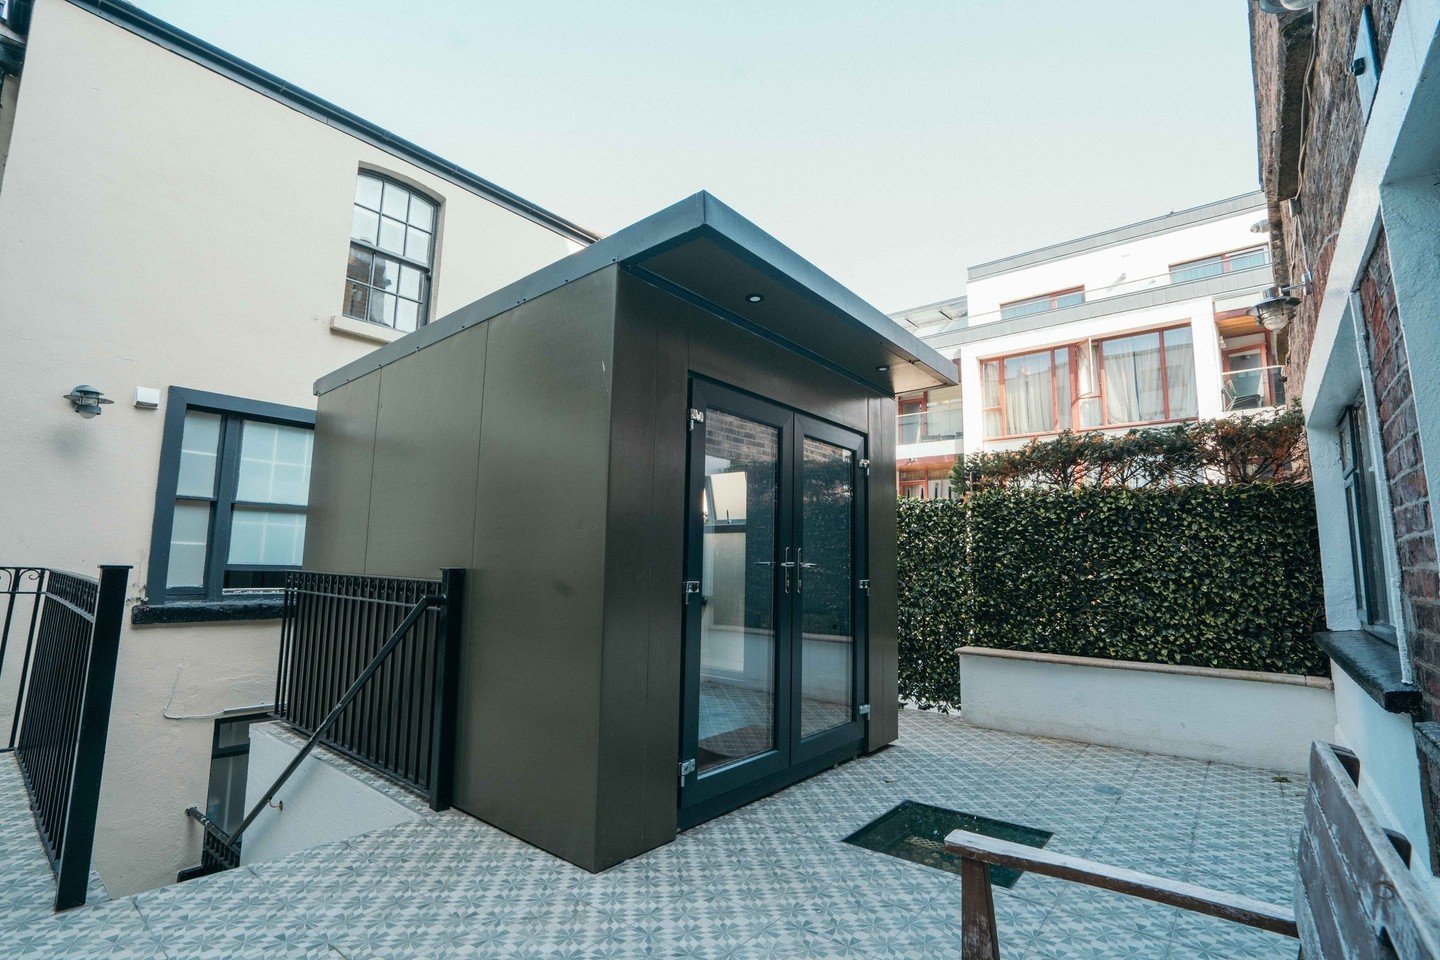 We have a range of dynamic spaces on offer including our outdoor meeting pod for warm weather days 😎⁠
⁠
Call us to arrange a no obligations visit to check it out, alongside many more modern facilities on offer to all our clients.